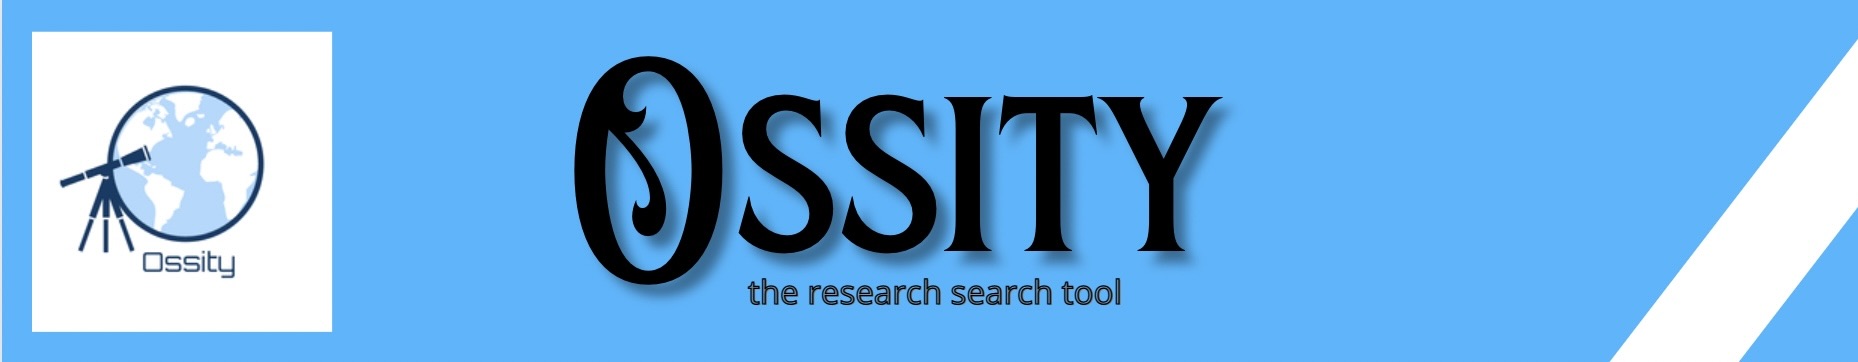 Ossity: the research search tool